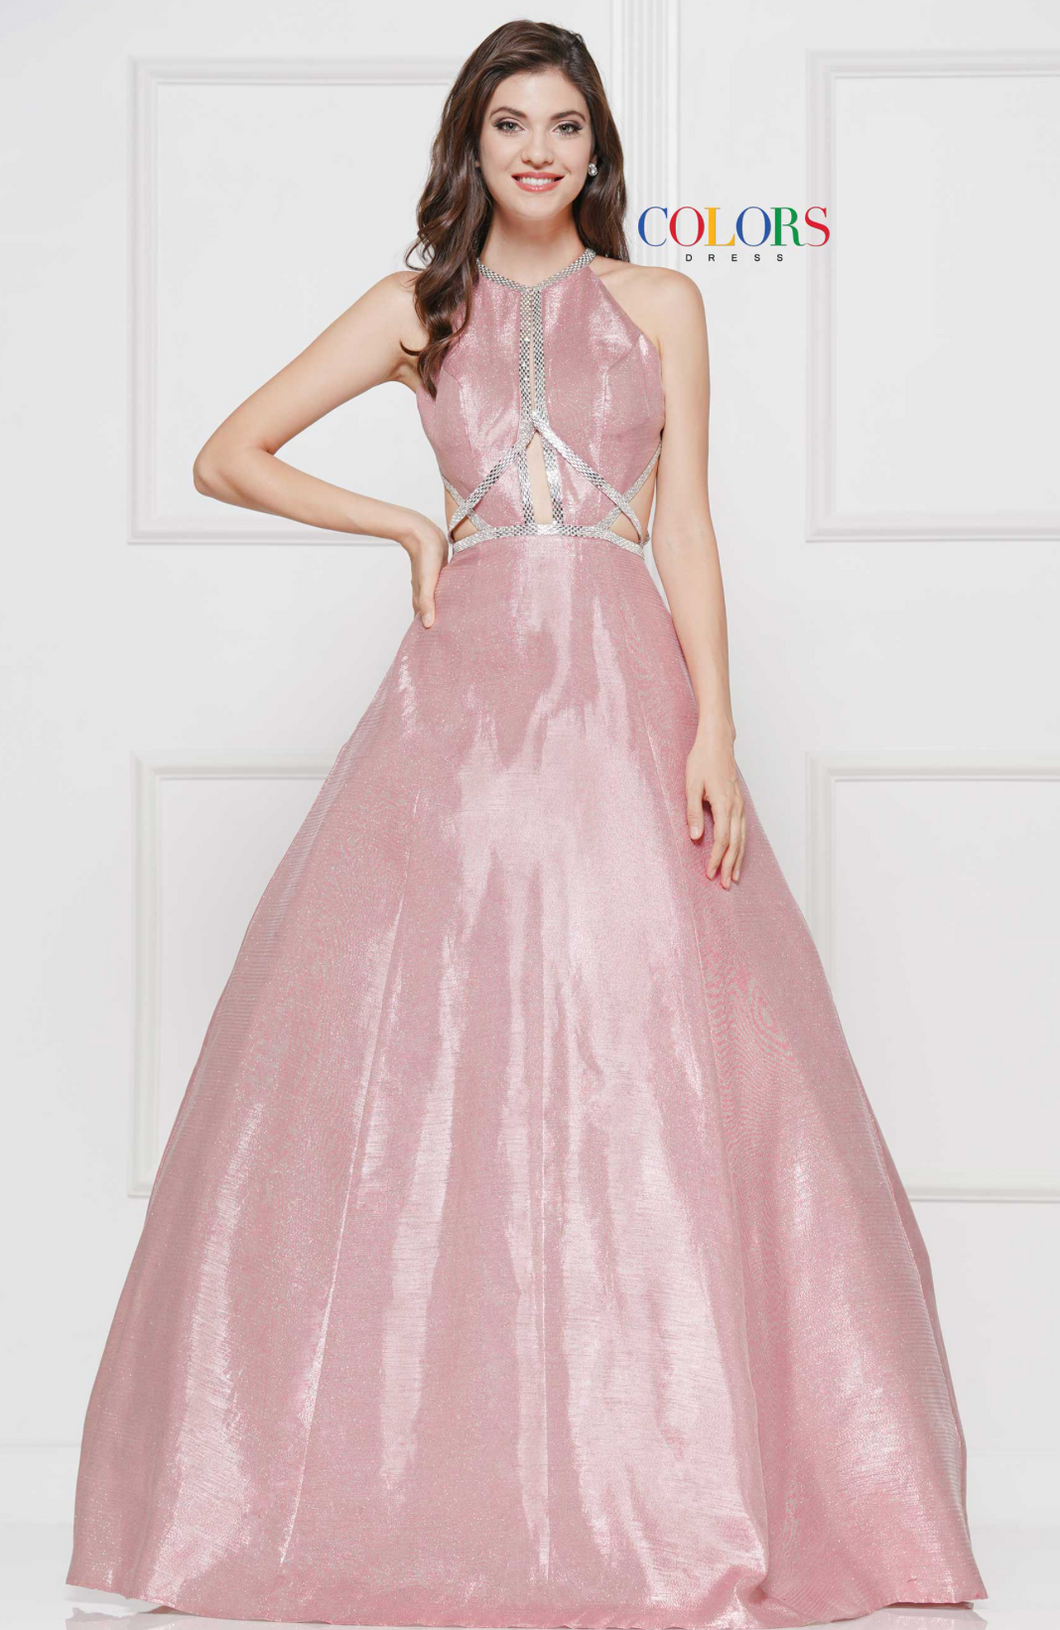 Colors Spring 2019 style 2089